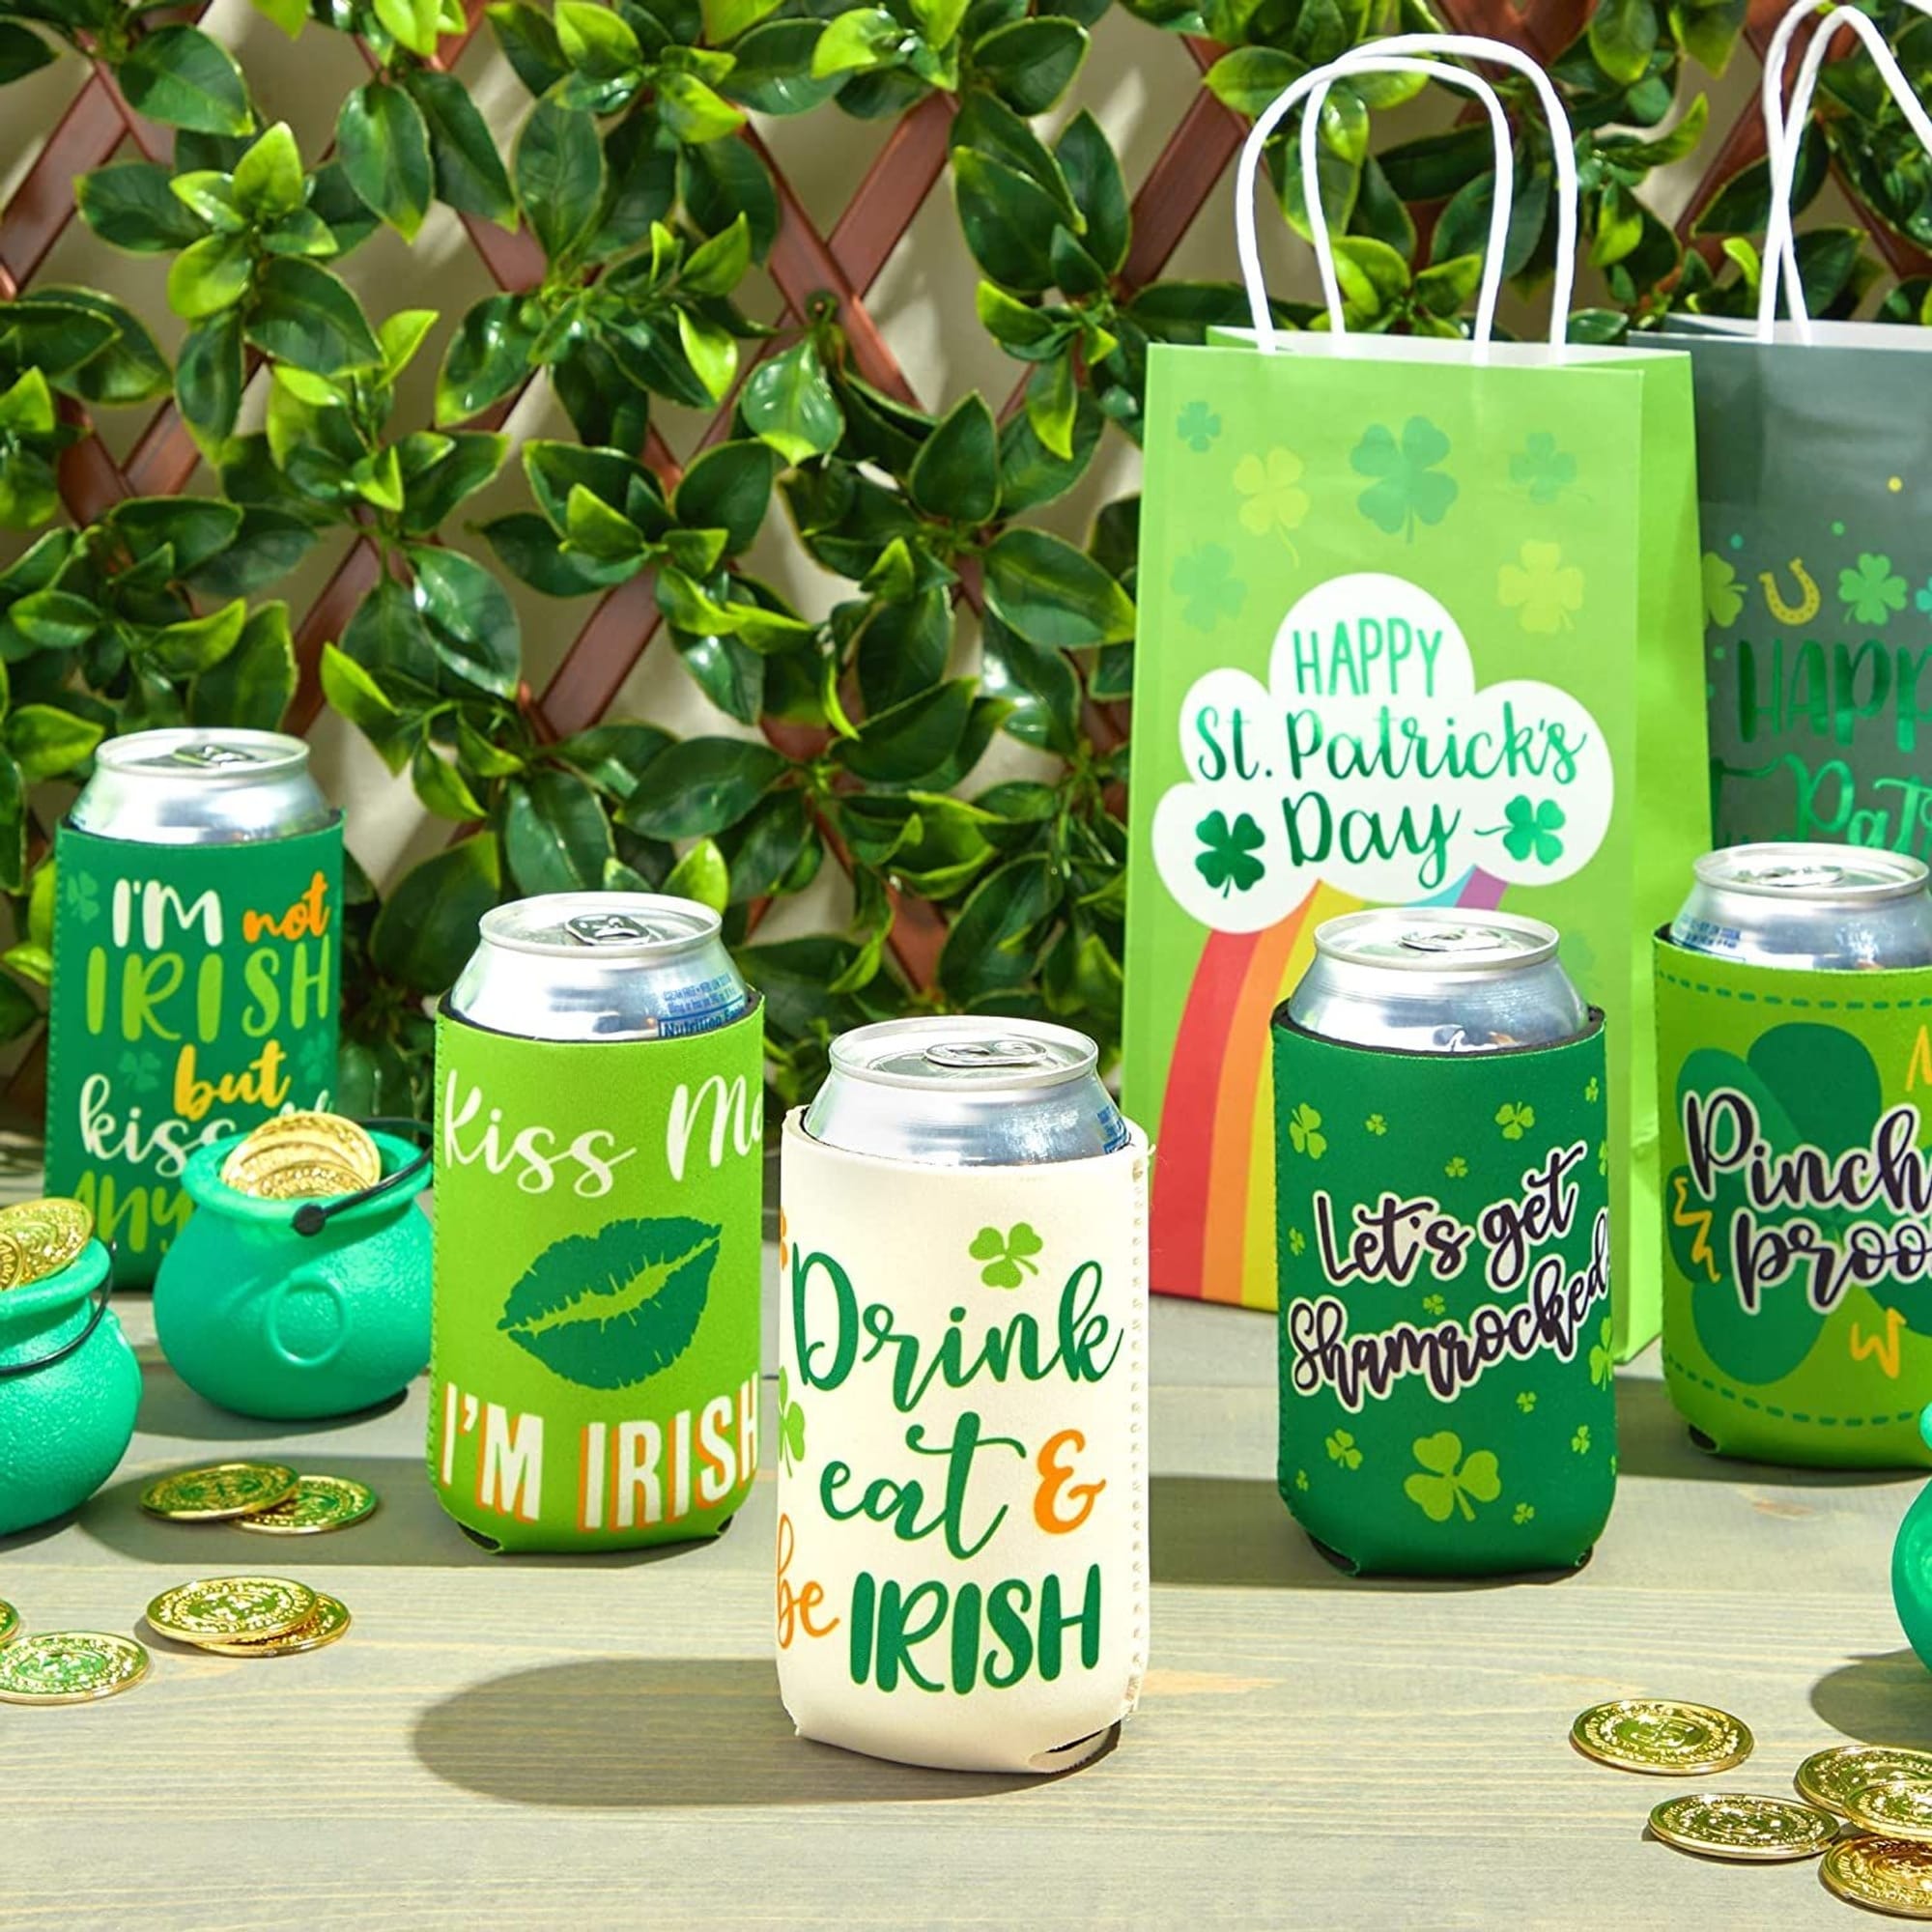 https://ak1.ostkcdn.com/images/products/is/images/direct/4362633bb5906da30258483e46094a6dccdb8405/12-oz-Irish-Neoprene-Can-Cooler-Sleeves-for-Soda%2C-Beer%2C-Beverages-%2812-Pack%29.jpg